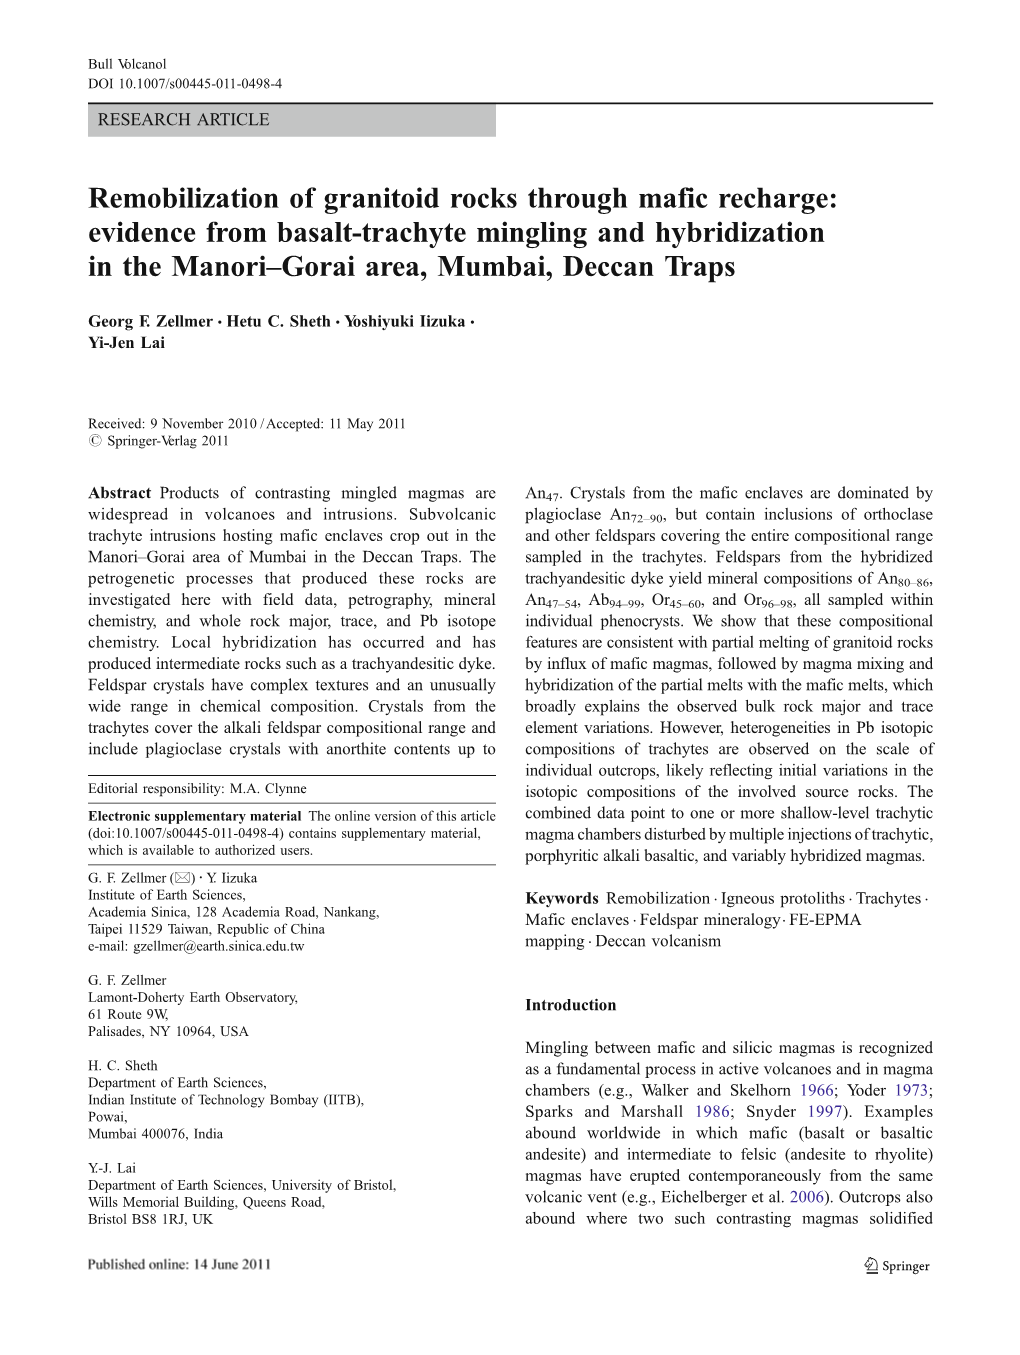 Remobilization of Granitoid Rocks Through Mafic Recharge: Evidence from Basalt-Trachyte Mingling and Hybridization in the Manori–Gorai Area, Mumbai, Deccan Traps